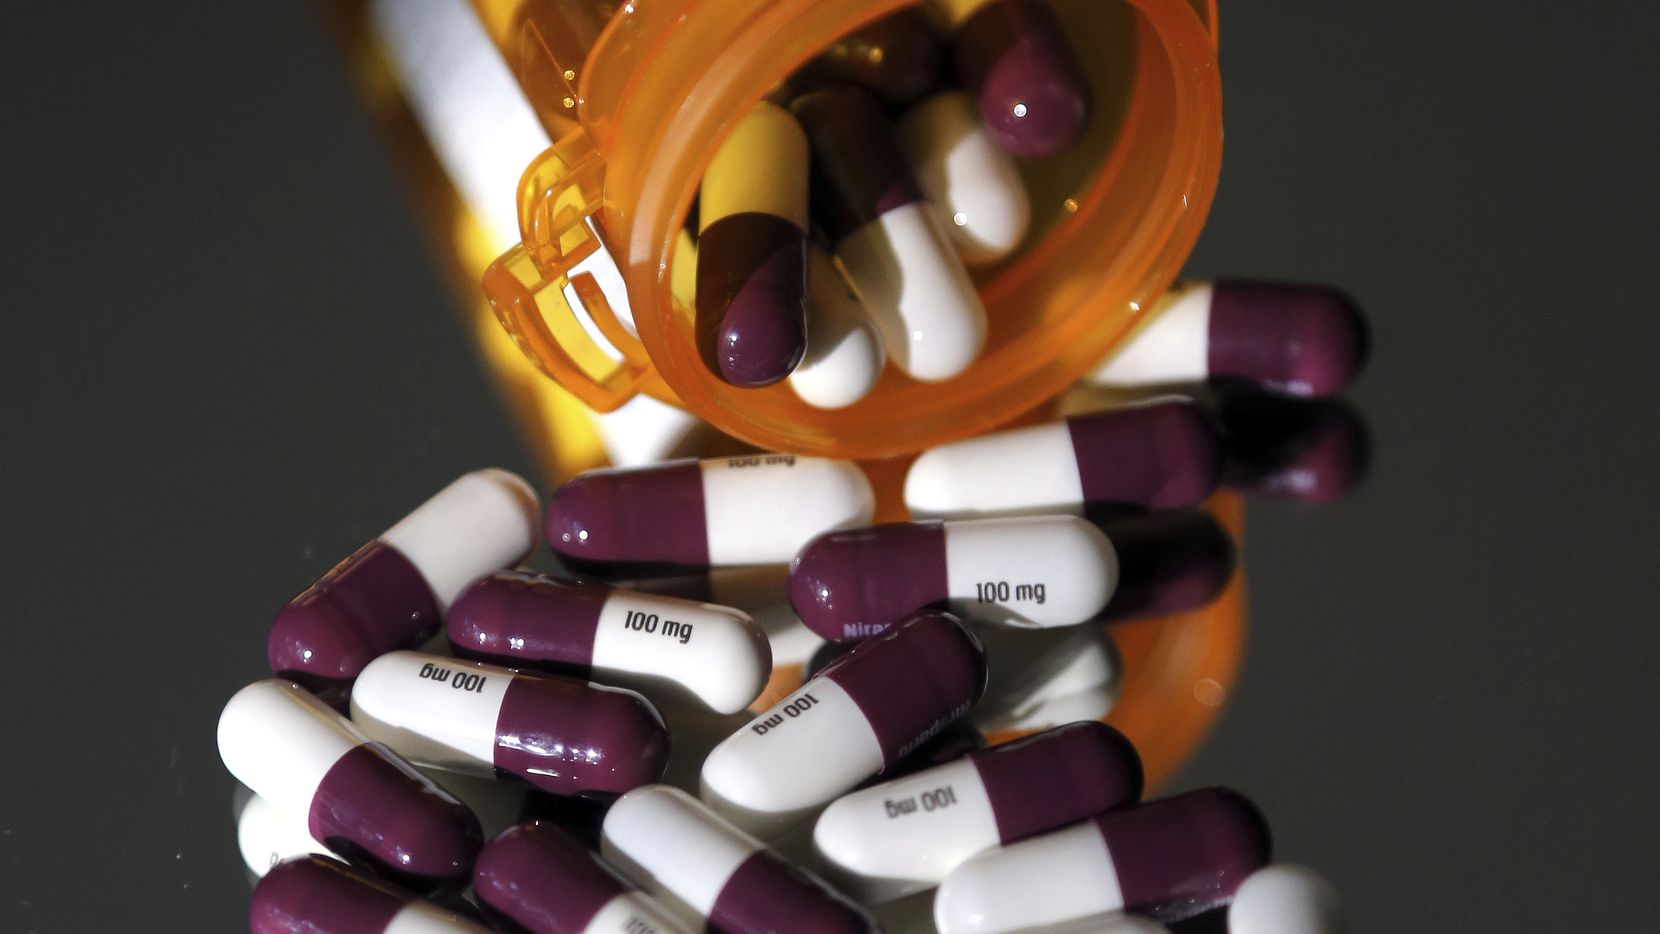 Arlington residents can drop off unused prescription drugs this weekend at several sites.